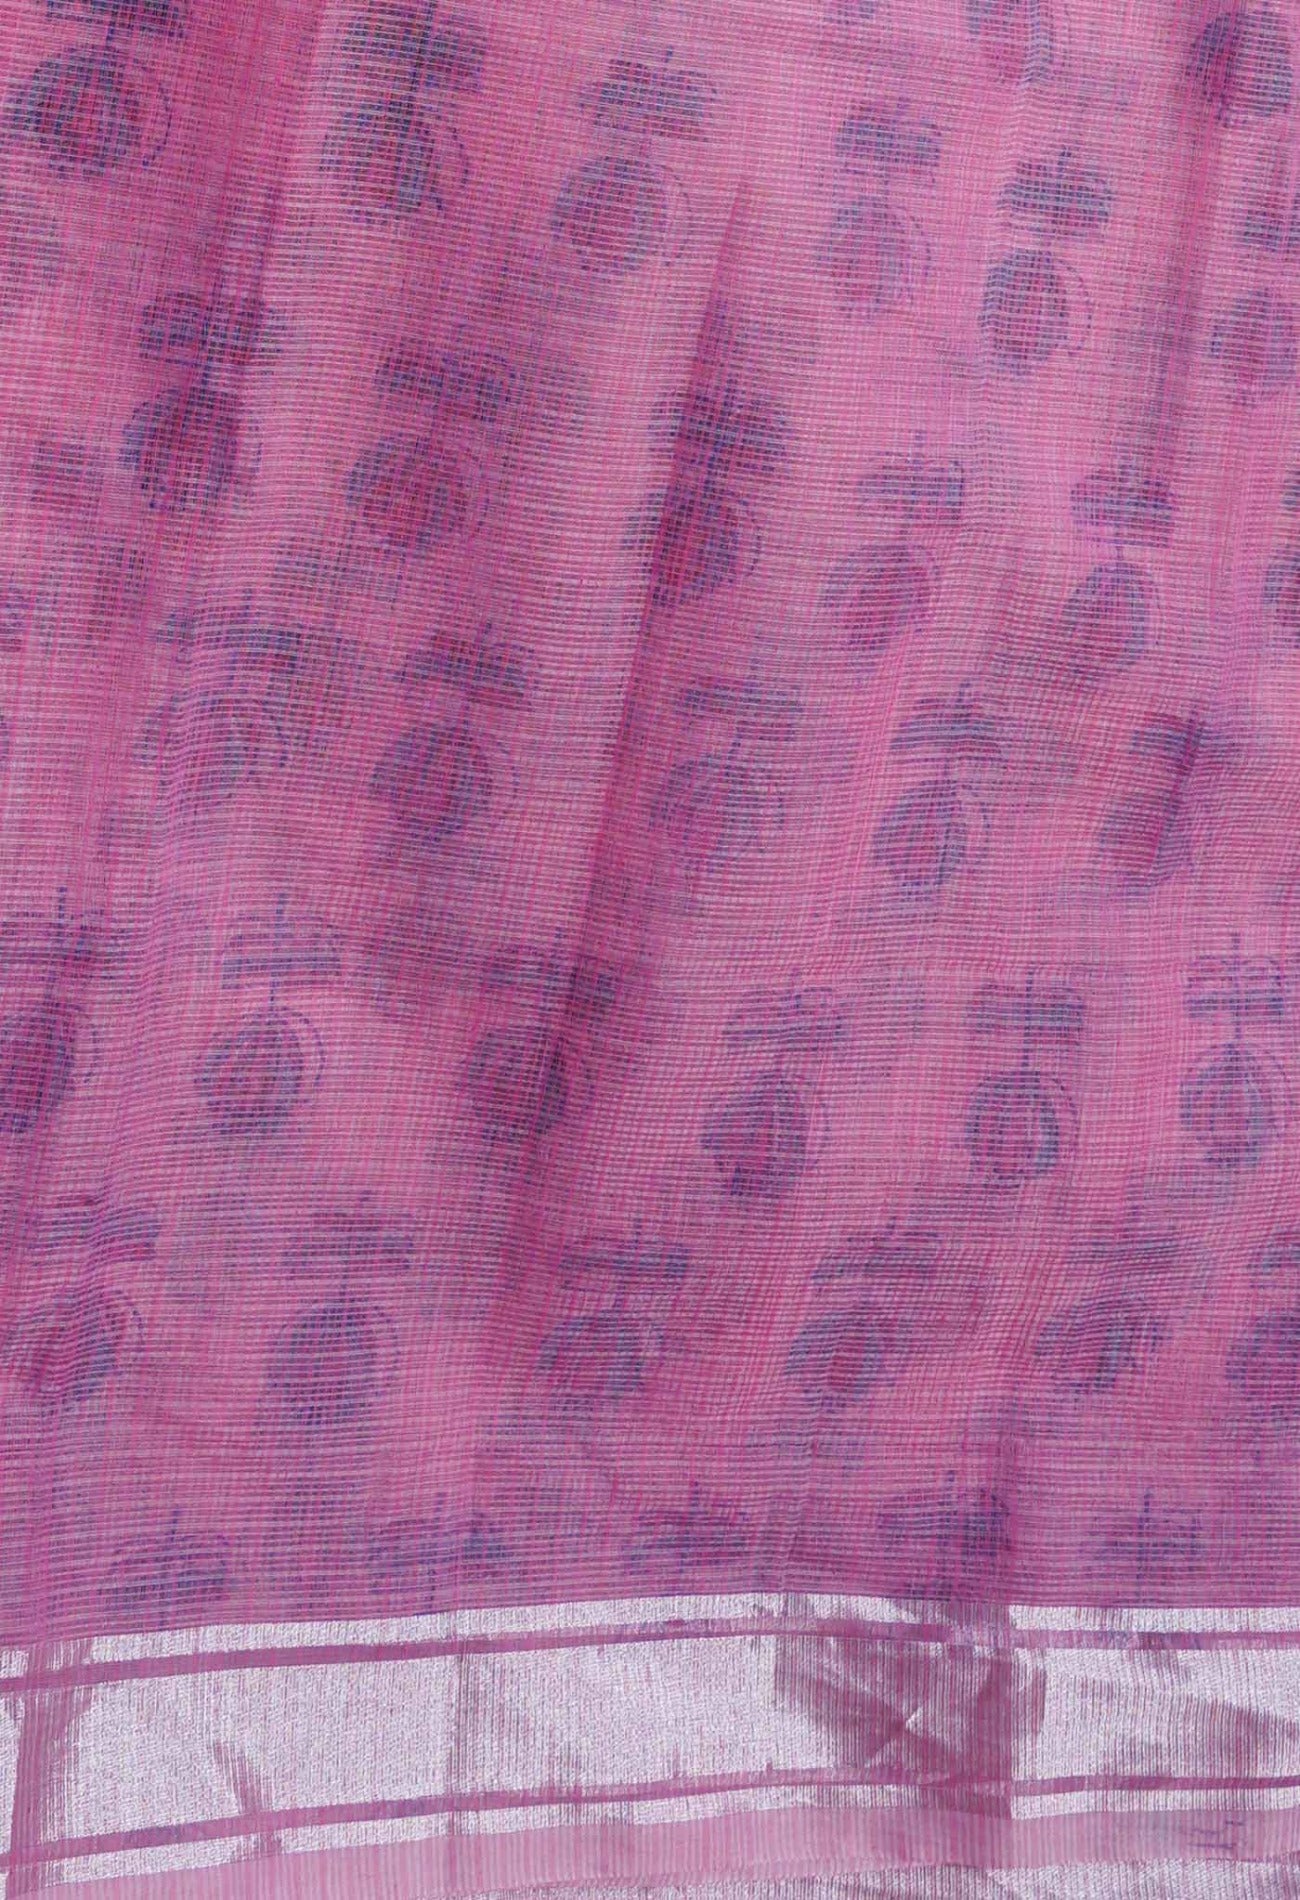 Online Shopping for Pink Pure Block Printed Cotton Saree with Hand Block Prints from Rajasthan at Unnatisilks.com India
